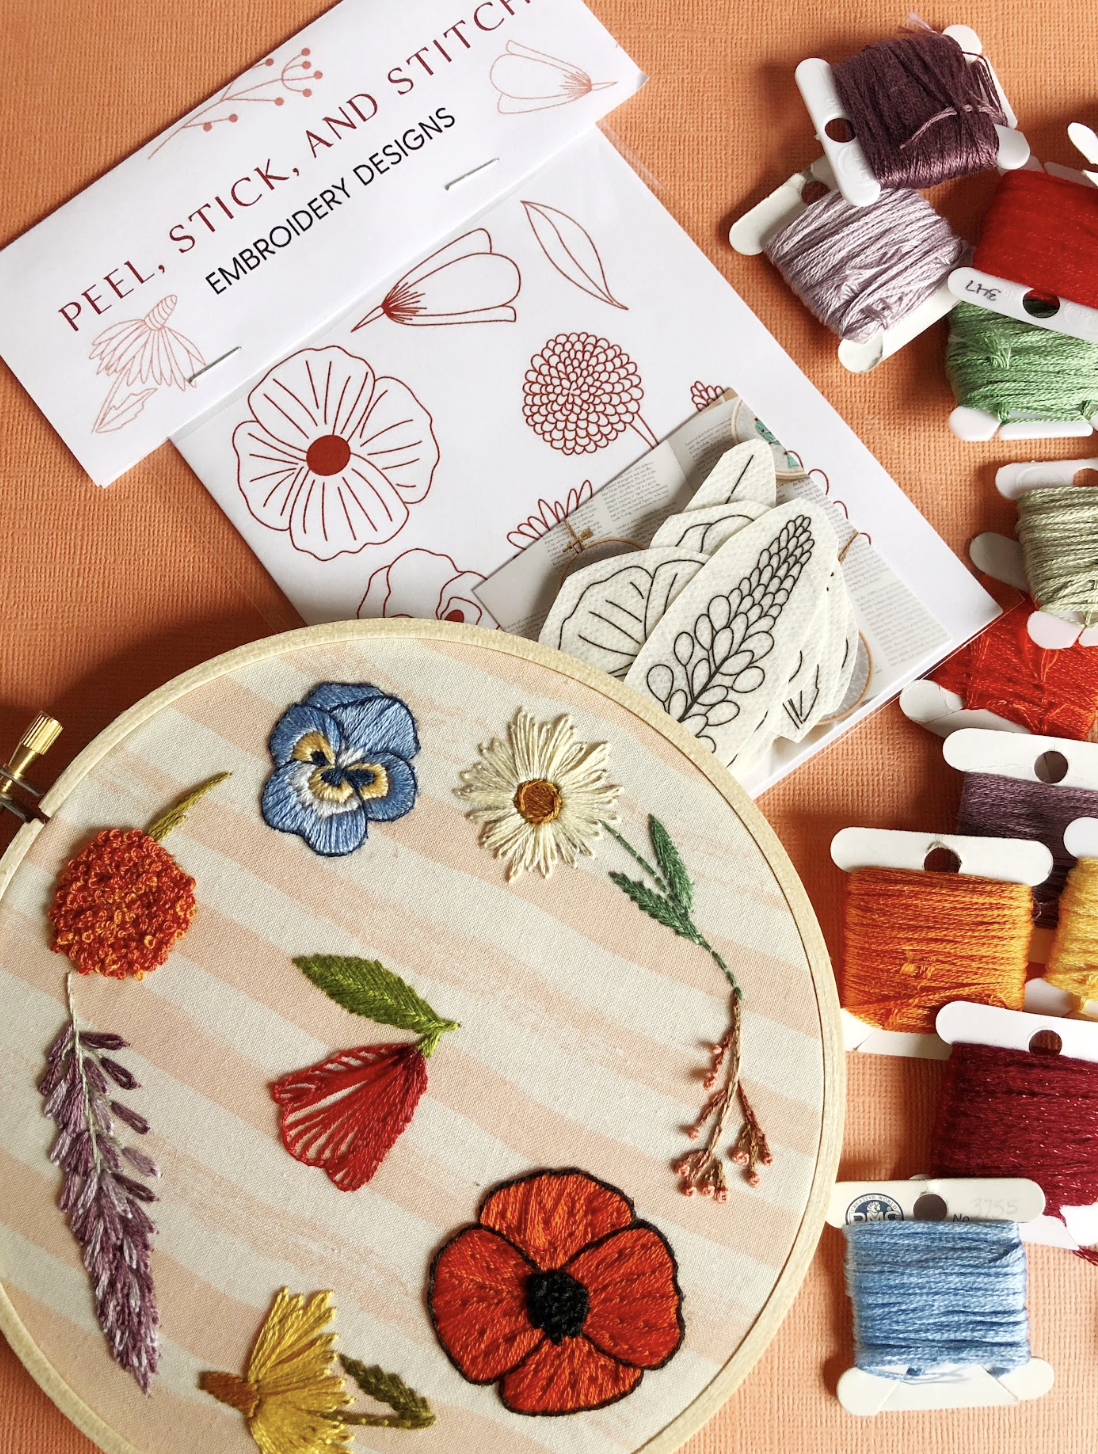 EMBROIDERY CLASS: Wildflower Embroidery Basics